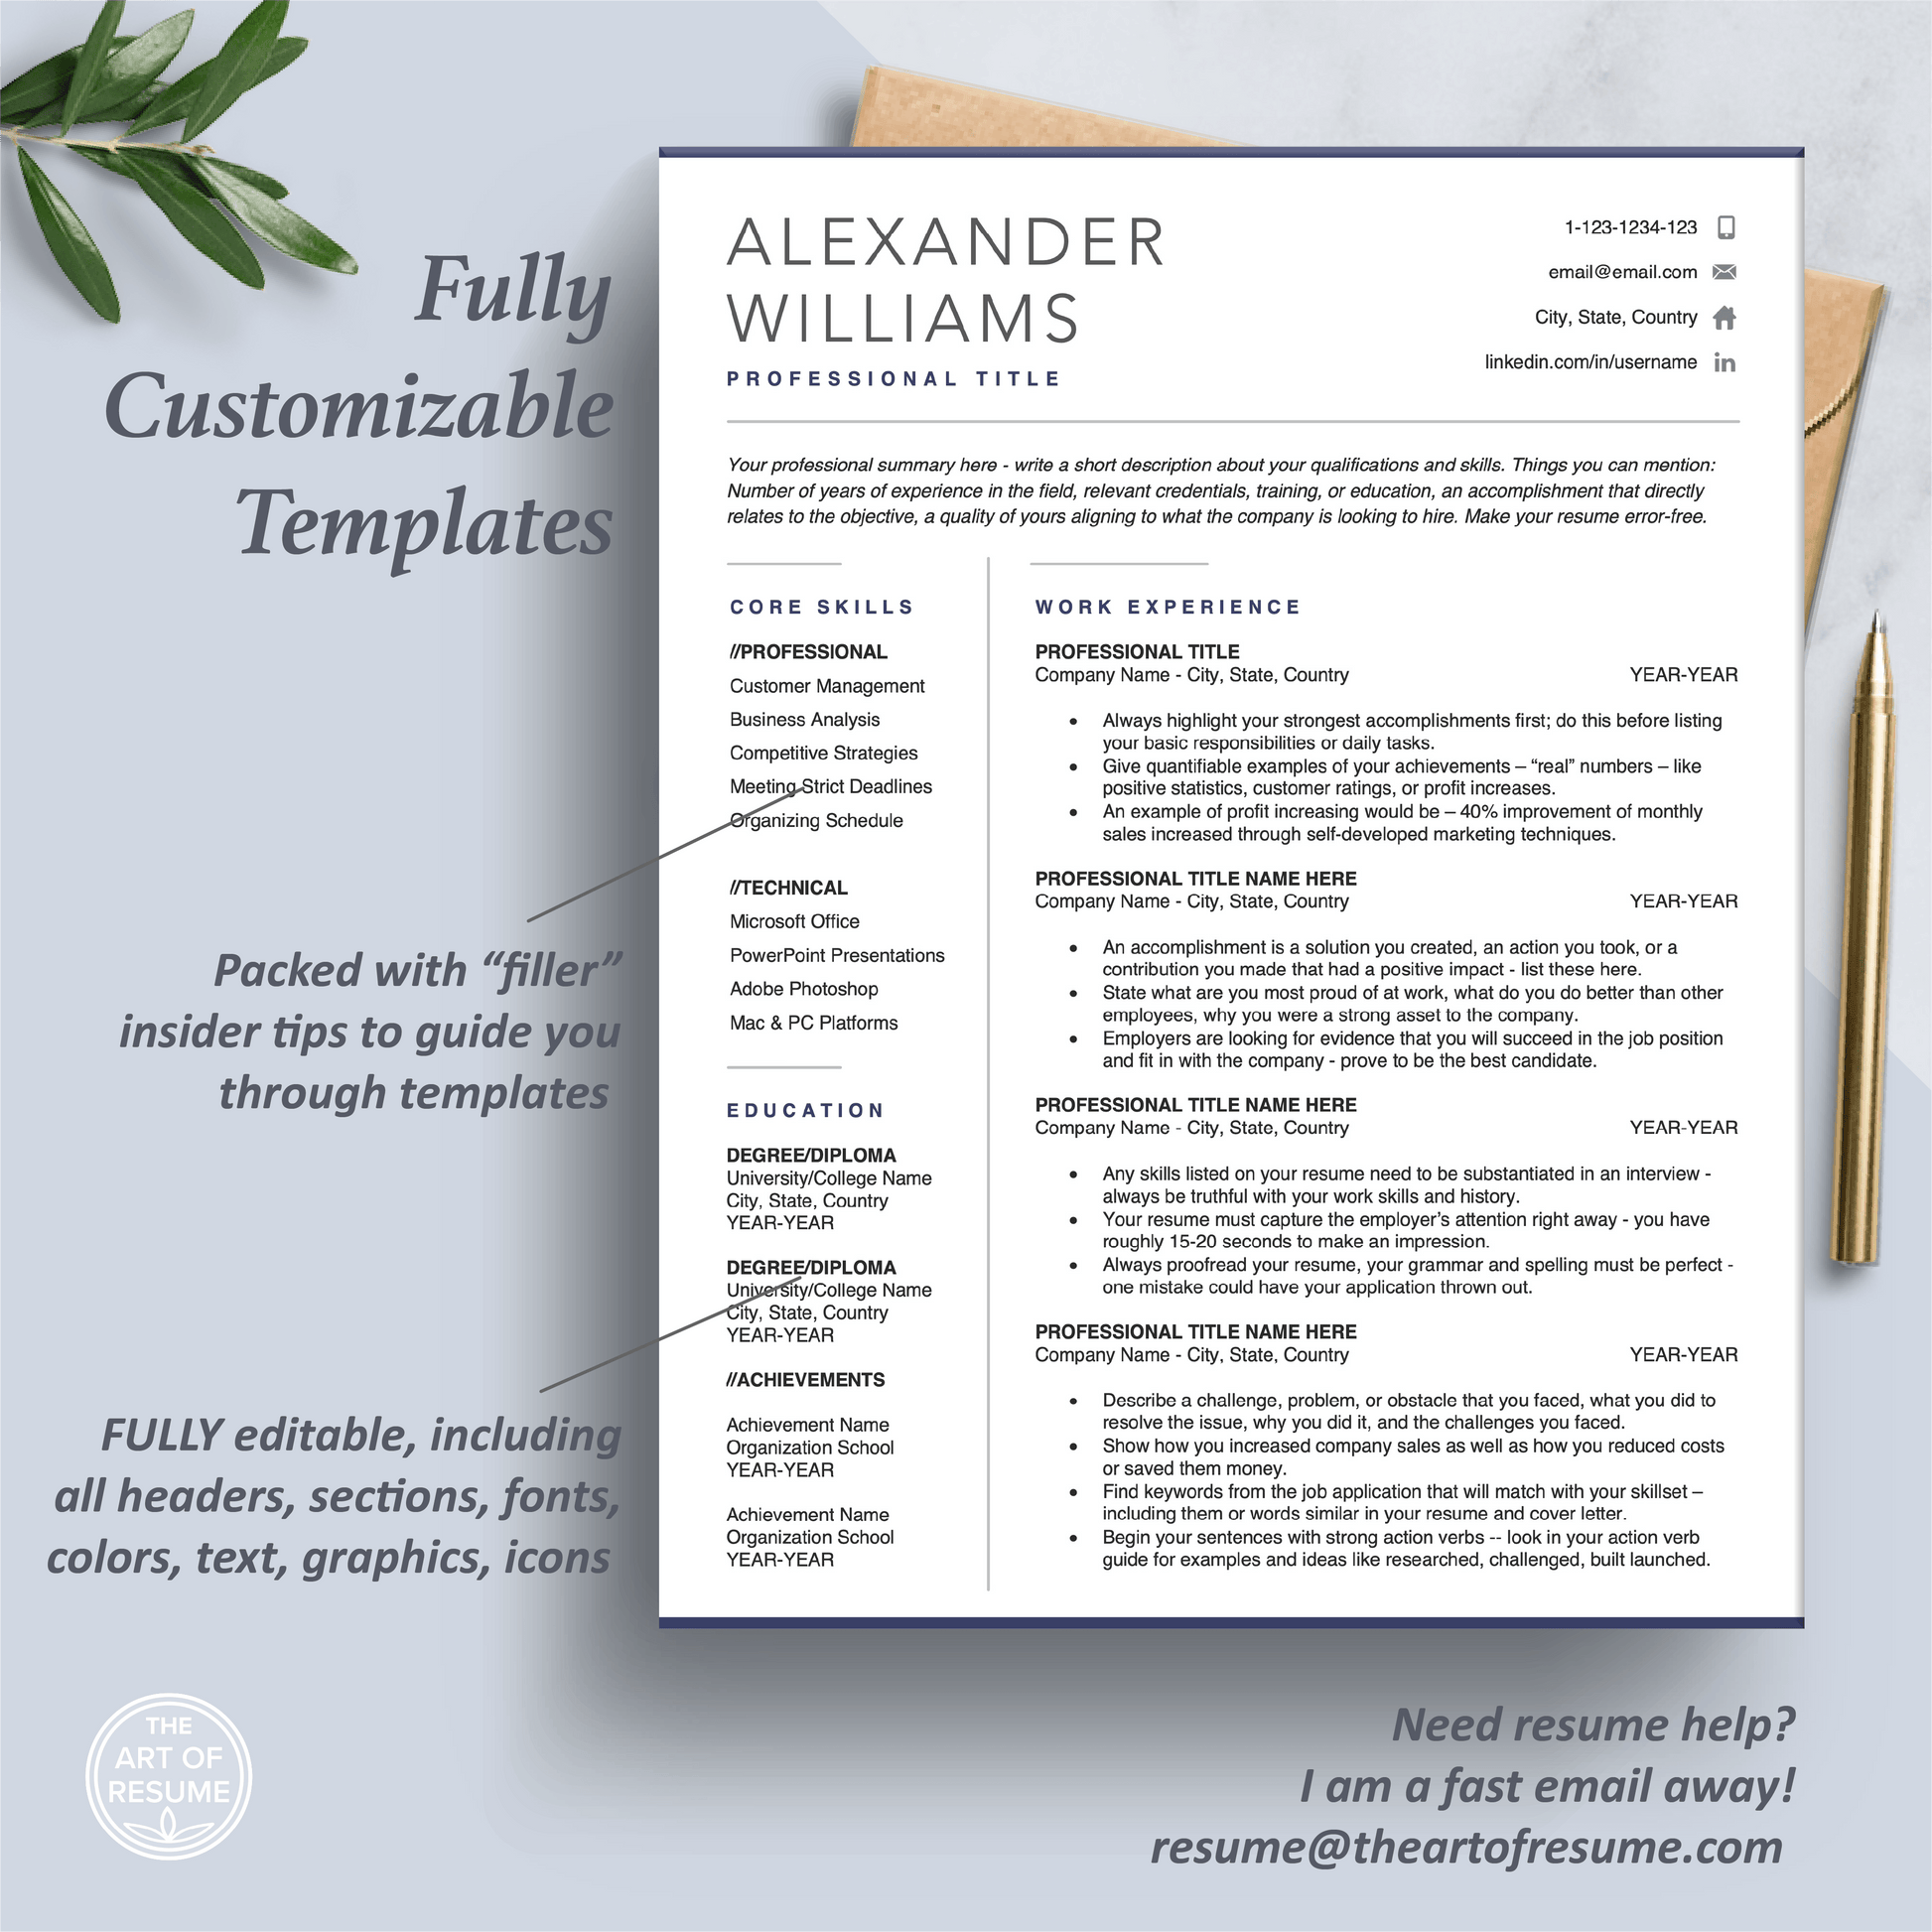 The Art of Resume Templates | One Page Professional Simple Resume CV Design Template Maker | Curriculum Vitae